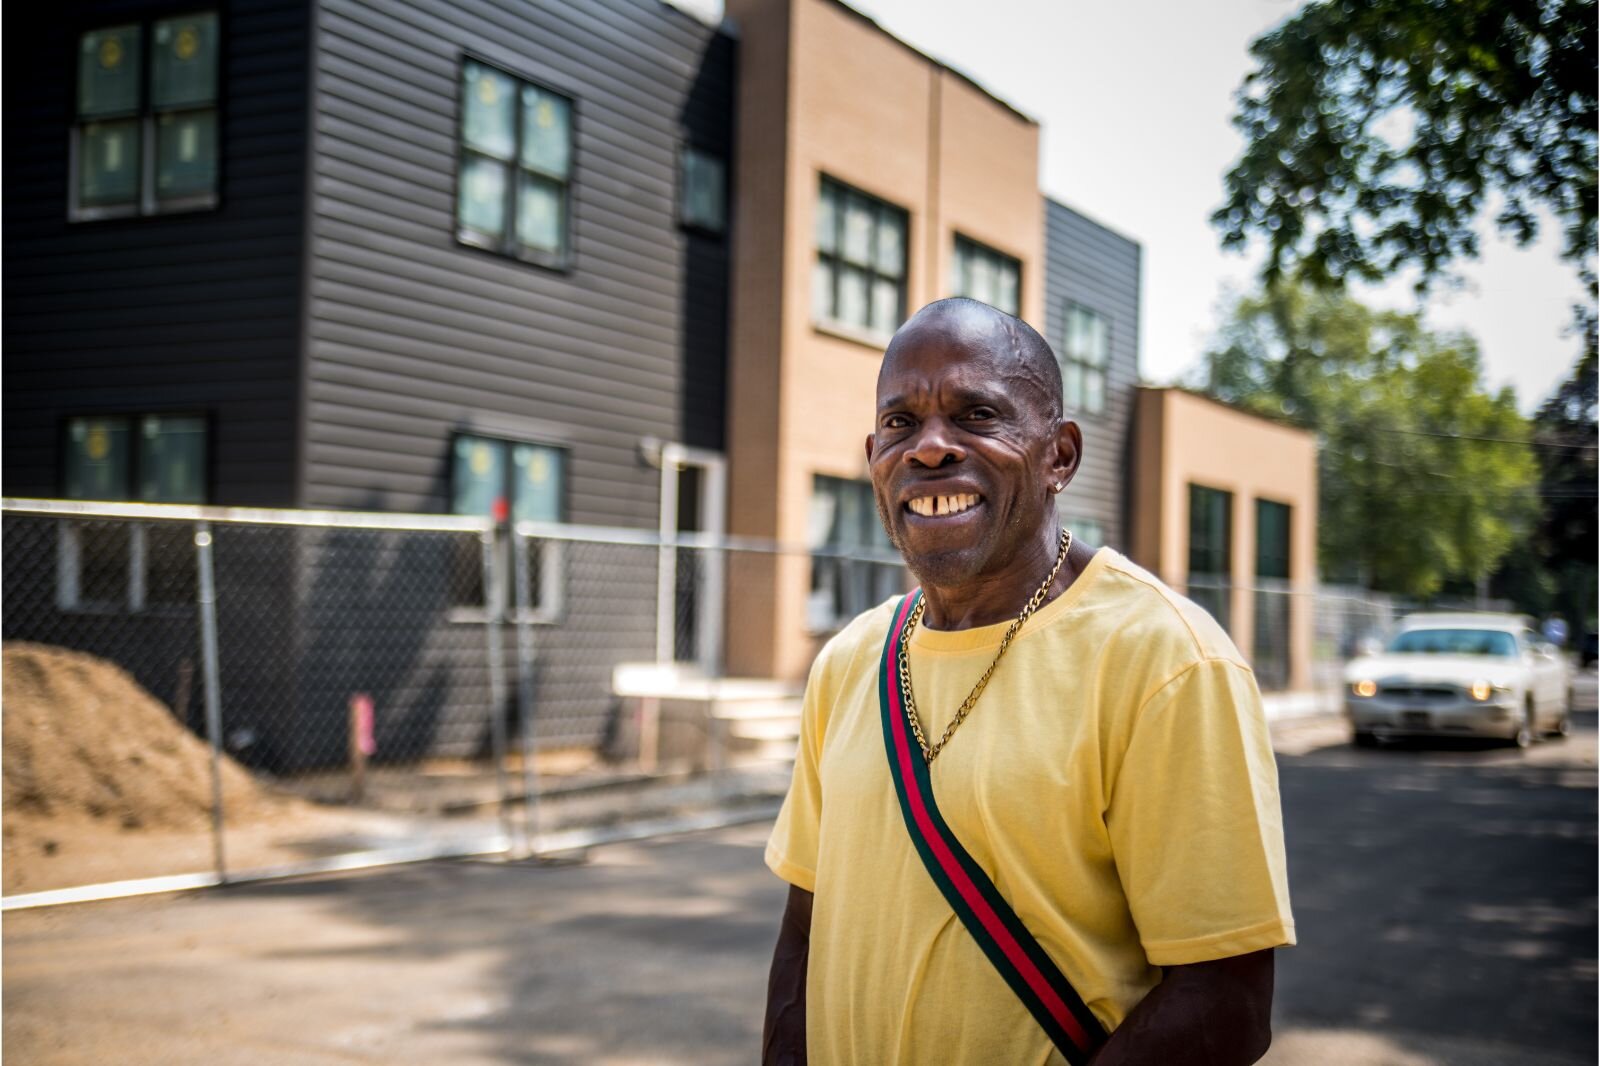 James Jackson, a Realtor and longtime area resident, says the new condo project is among a few that are helping to breathe new life into the Eastside Neighborhood.